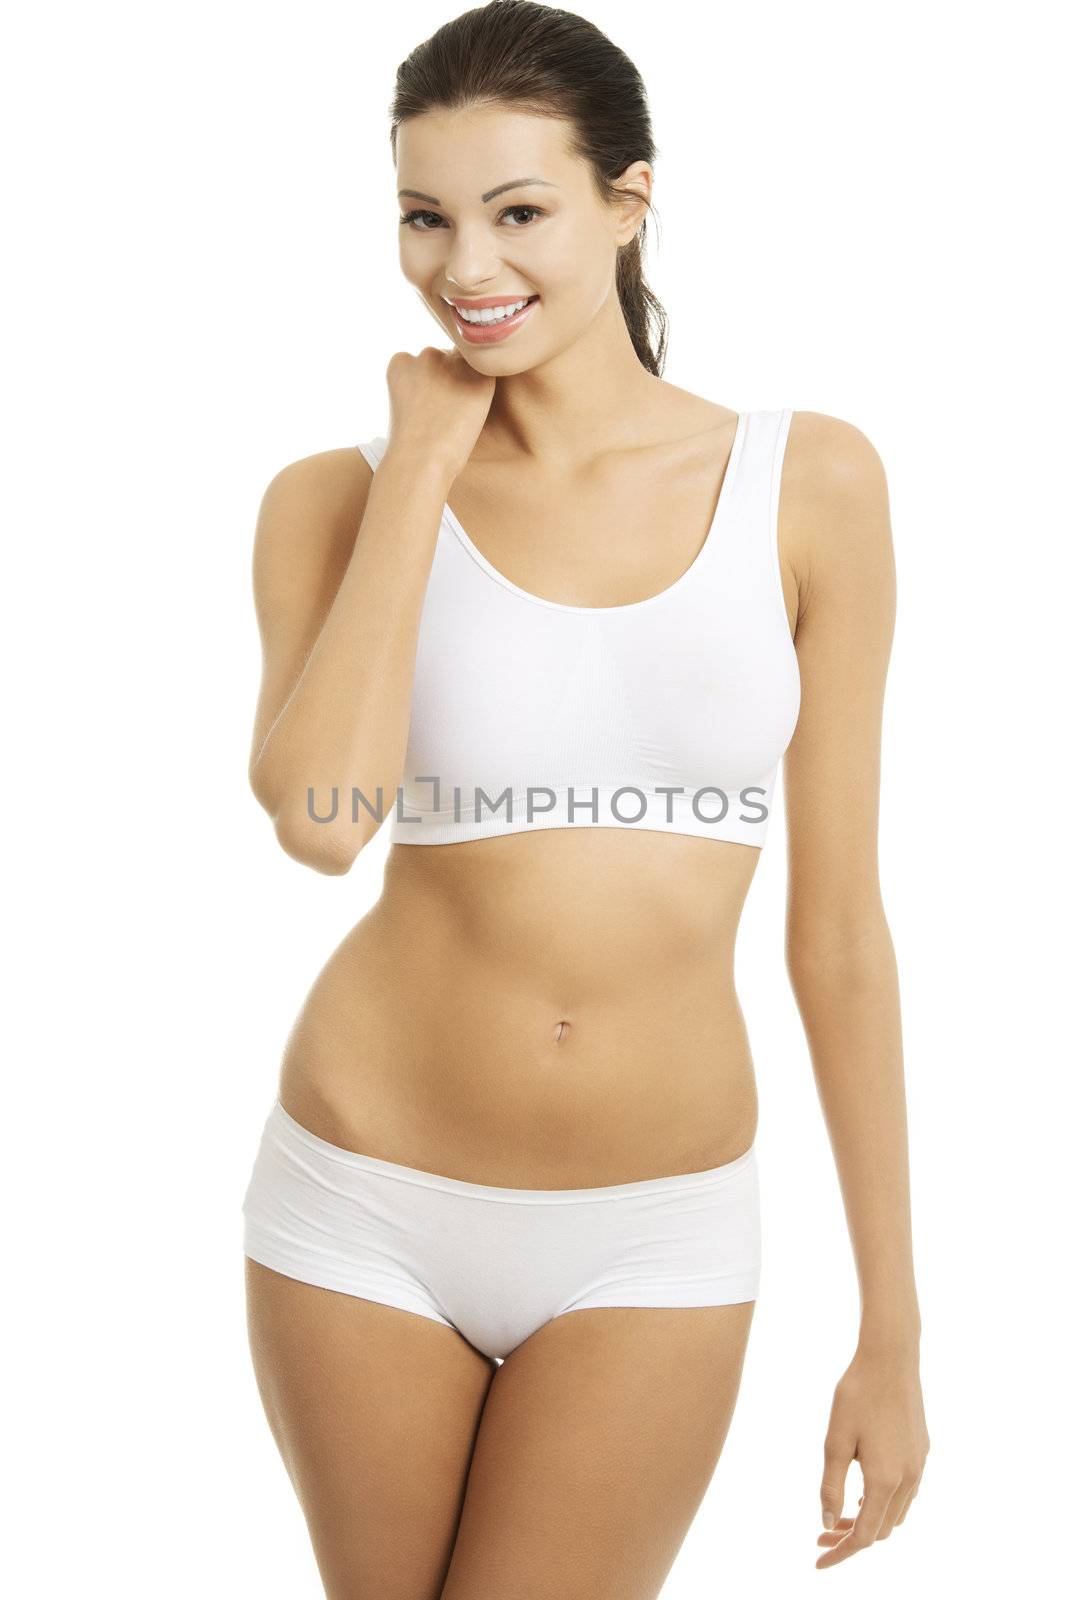 Taned happy fit woman in casual underwear. Diet, healthy lifestyle and body care concept.